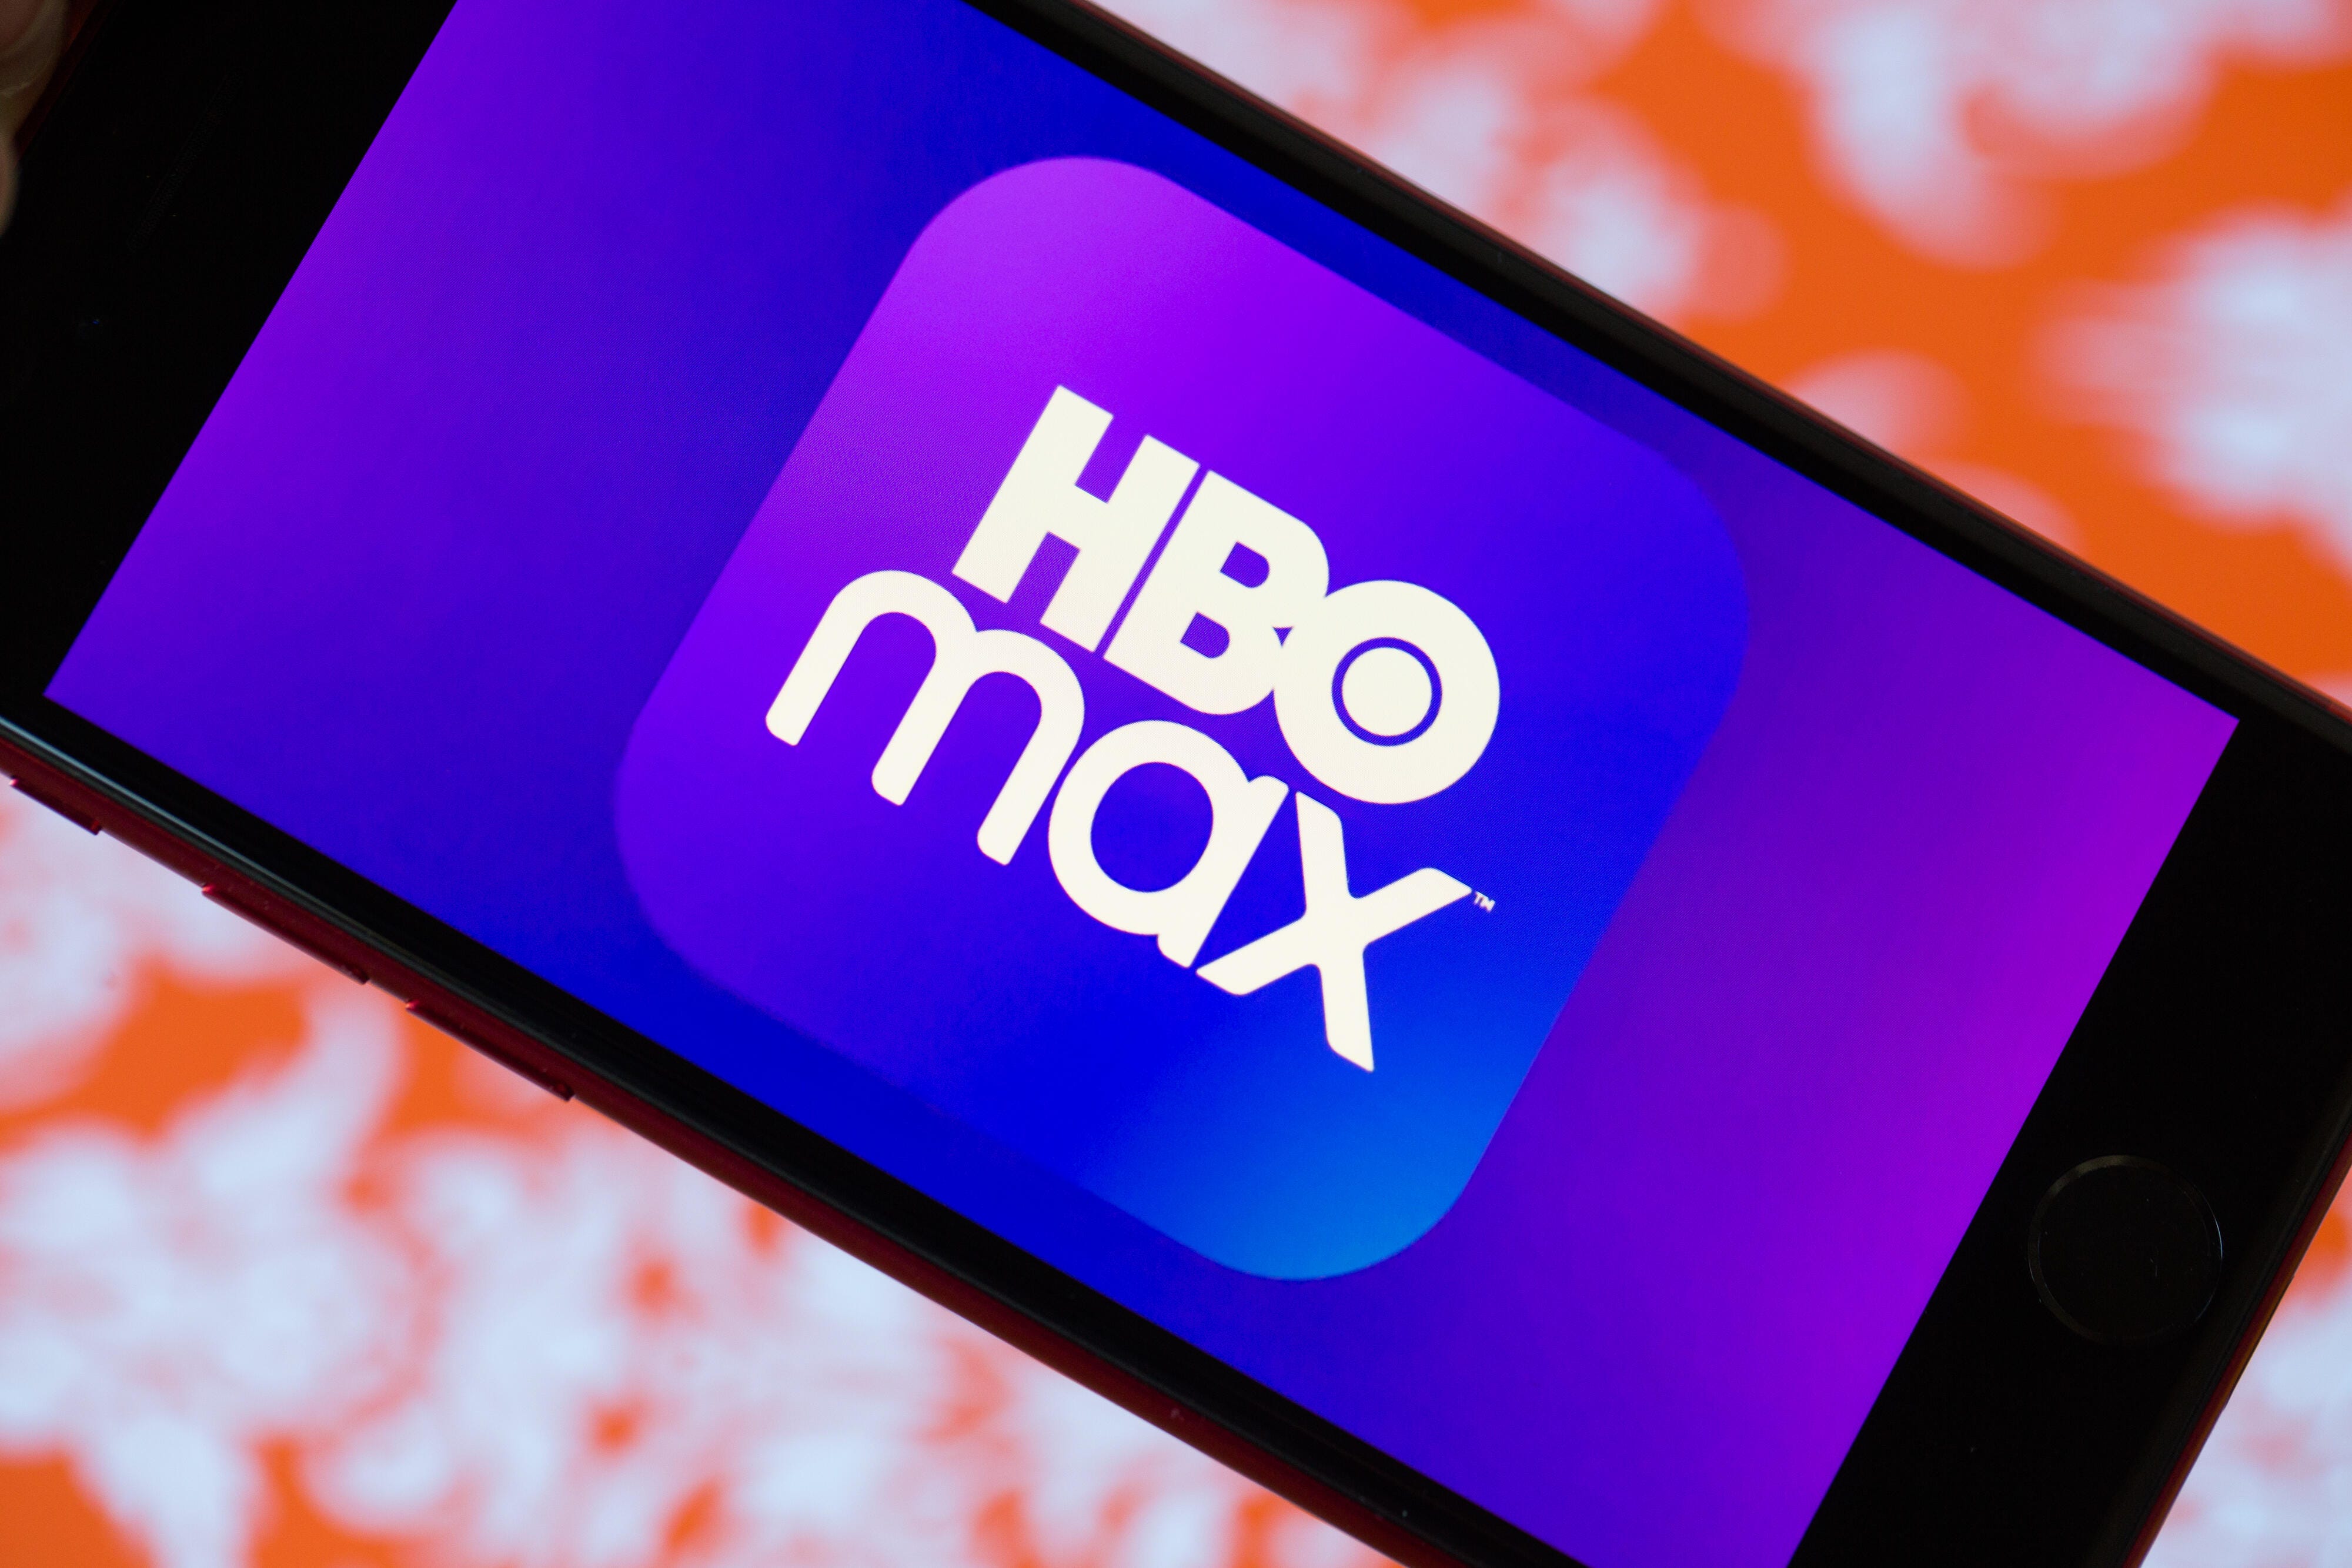 HBO Max logo on a phone